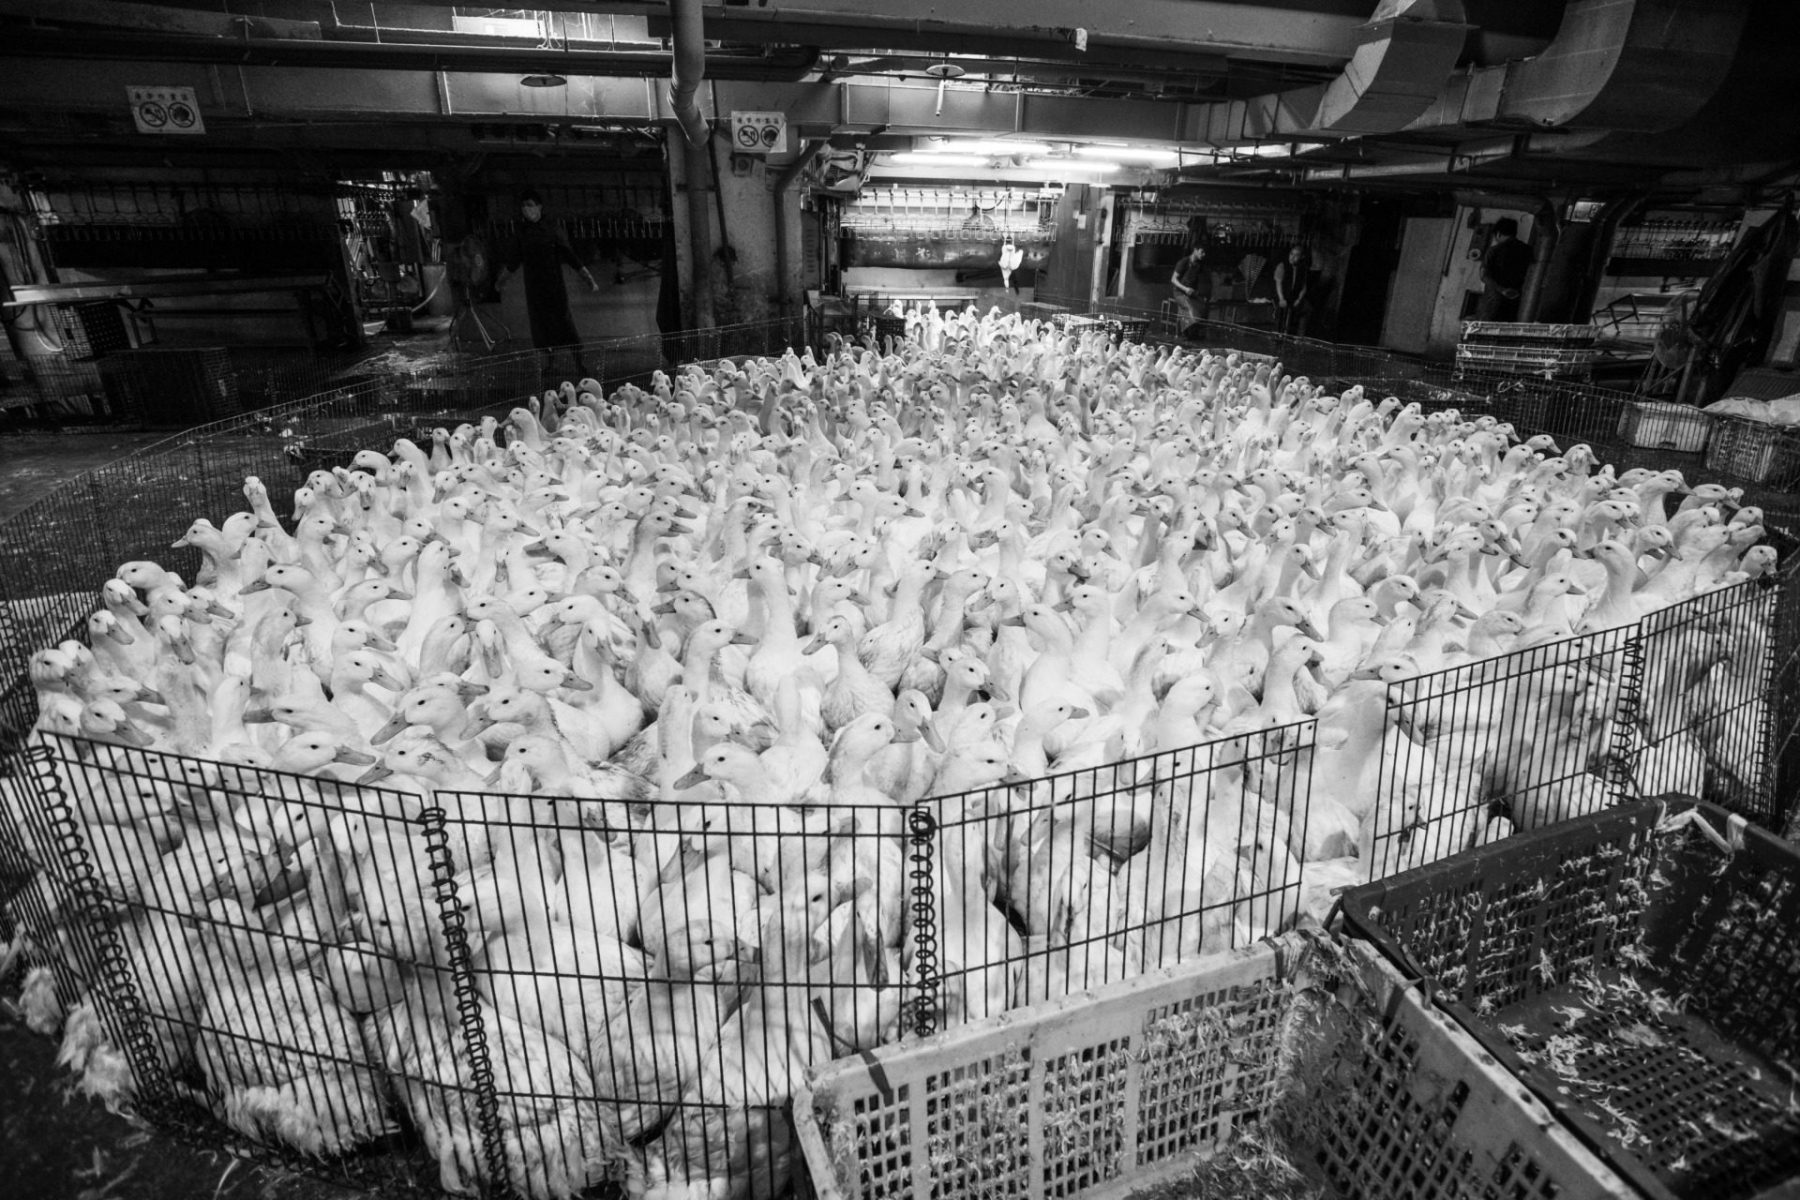 After unloading from transport trucks, ducks are corralled on the floor of the slaughterhouse. Taiwan. Jo-Anne McArthur